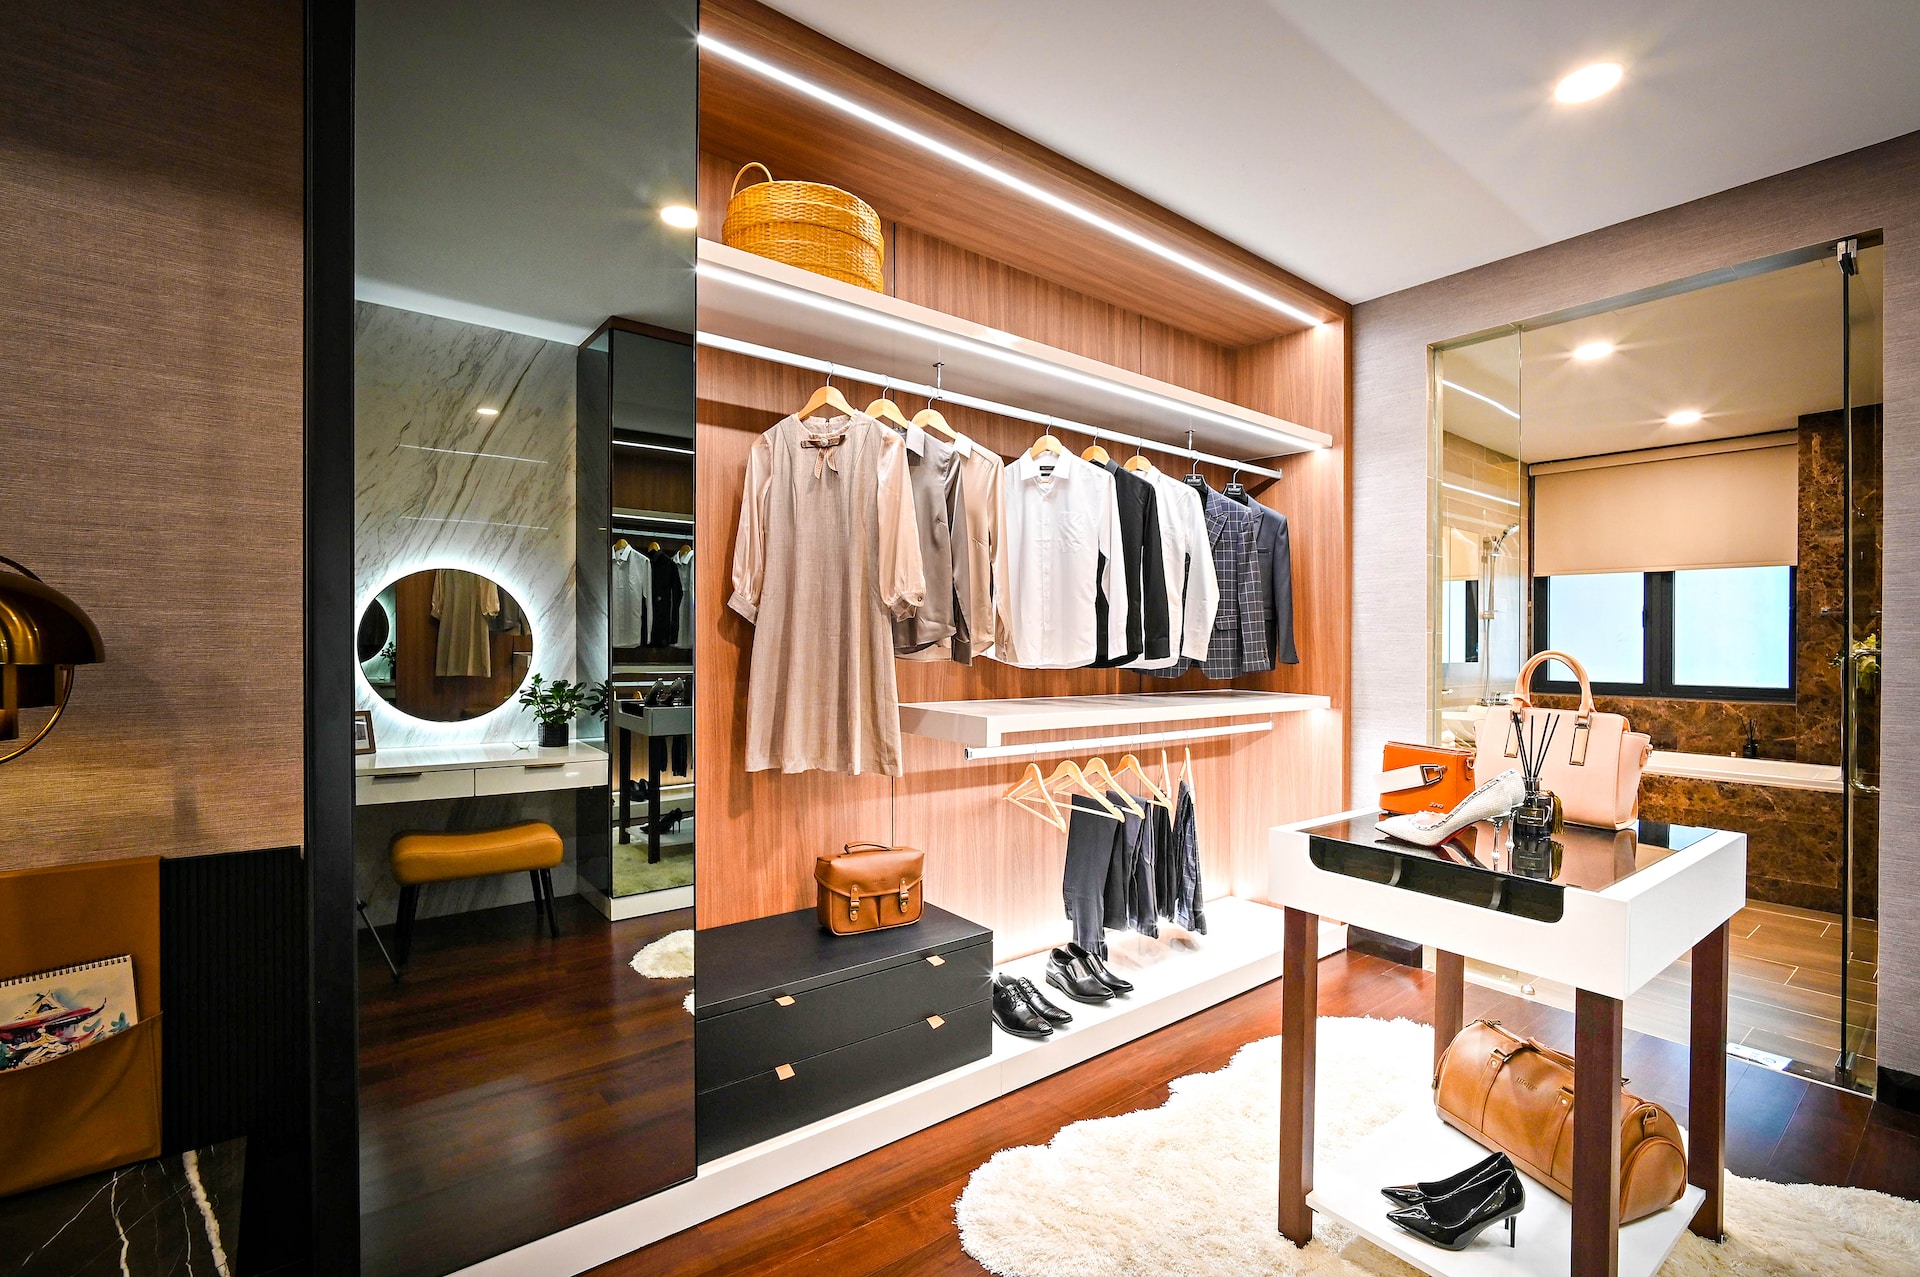 High end, built in wardrobe and dressing room.